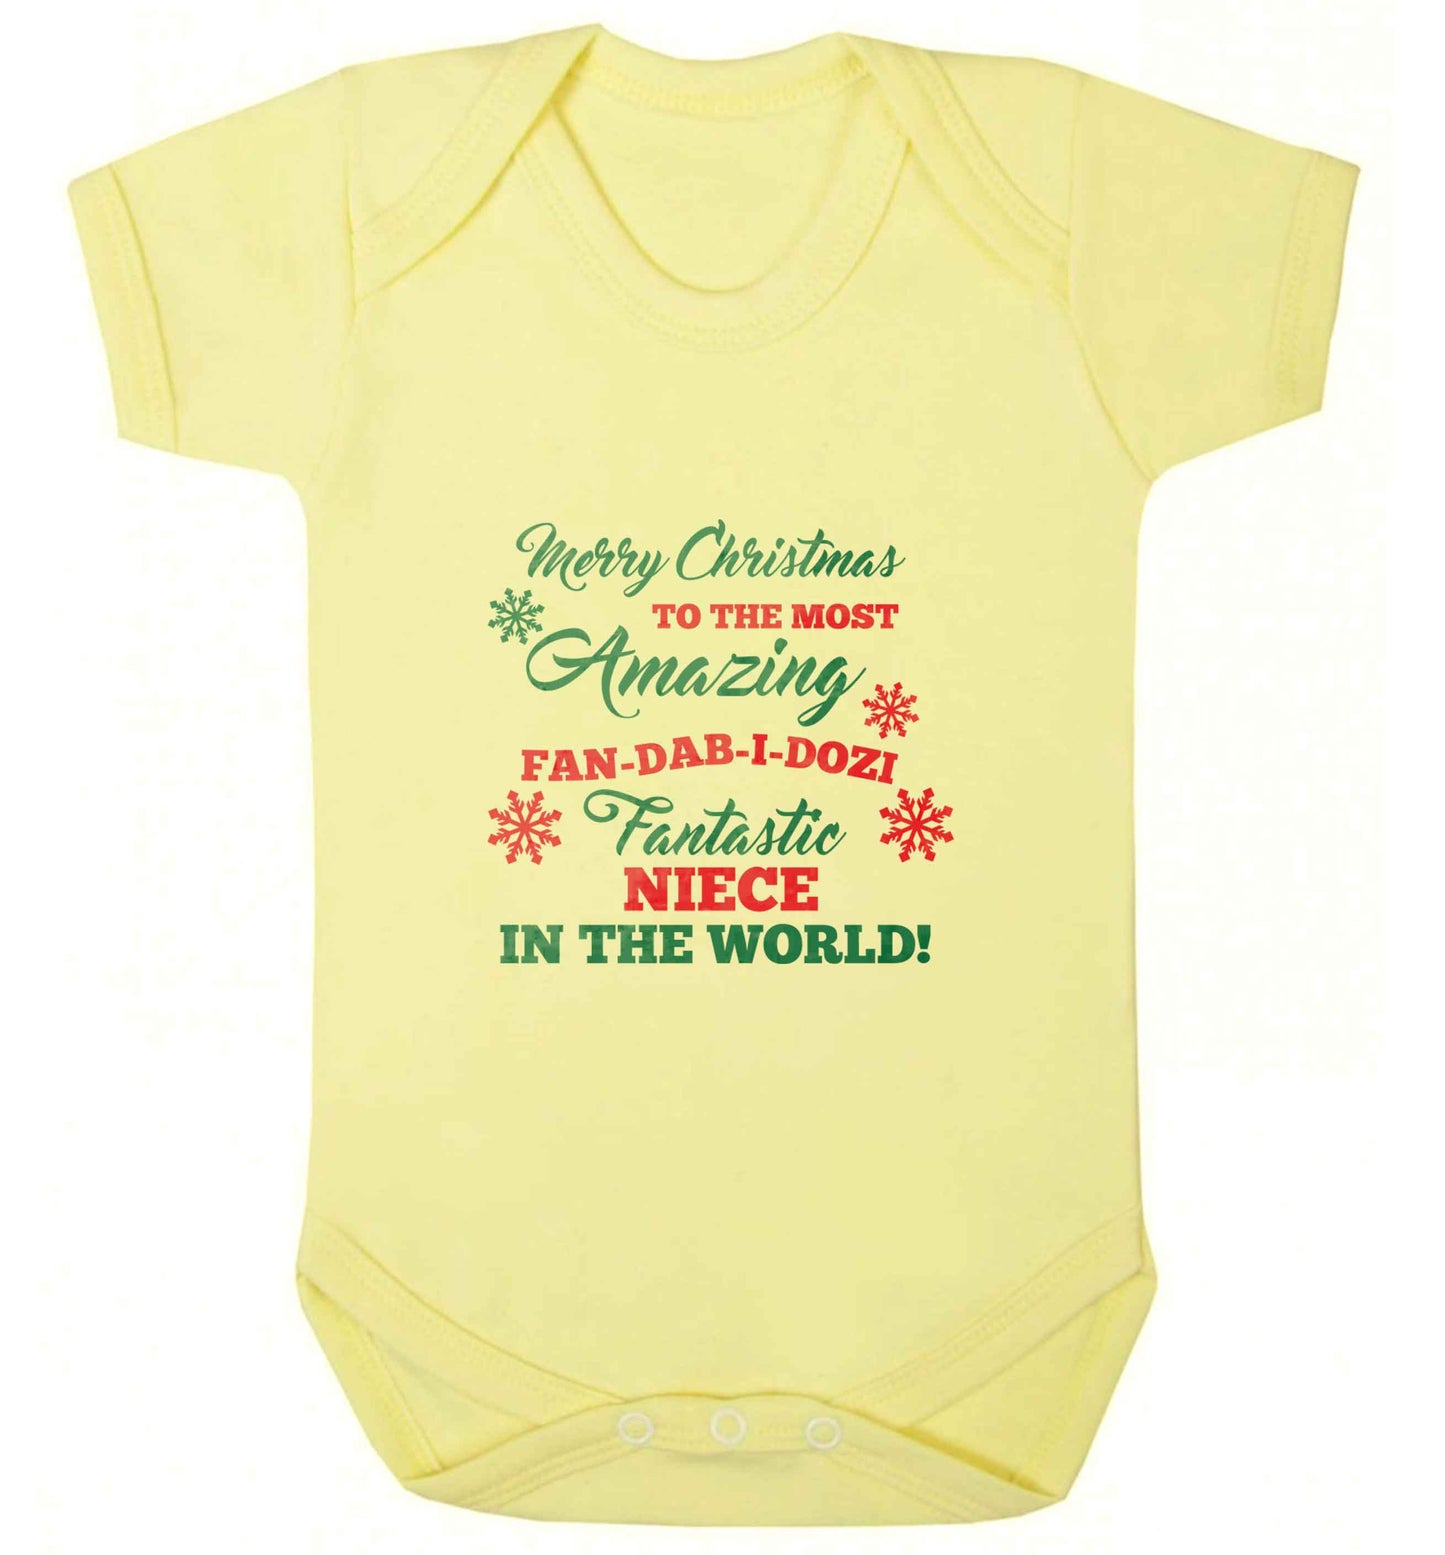 Merry Christmas to the most amazing fan-dab-i-dozi fantasic Niece in the world baby vest pale yellow 18-24 months